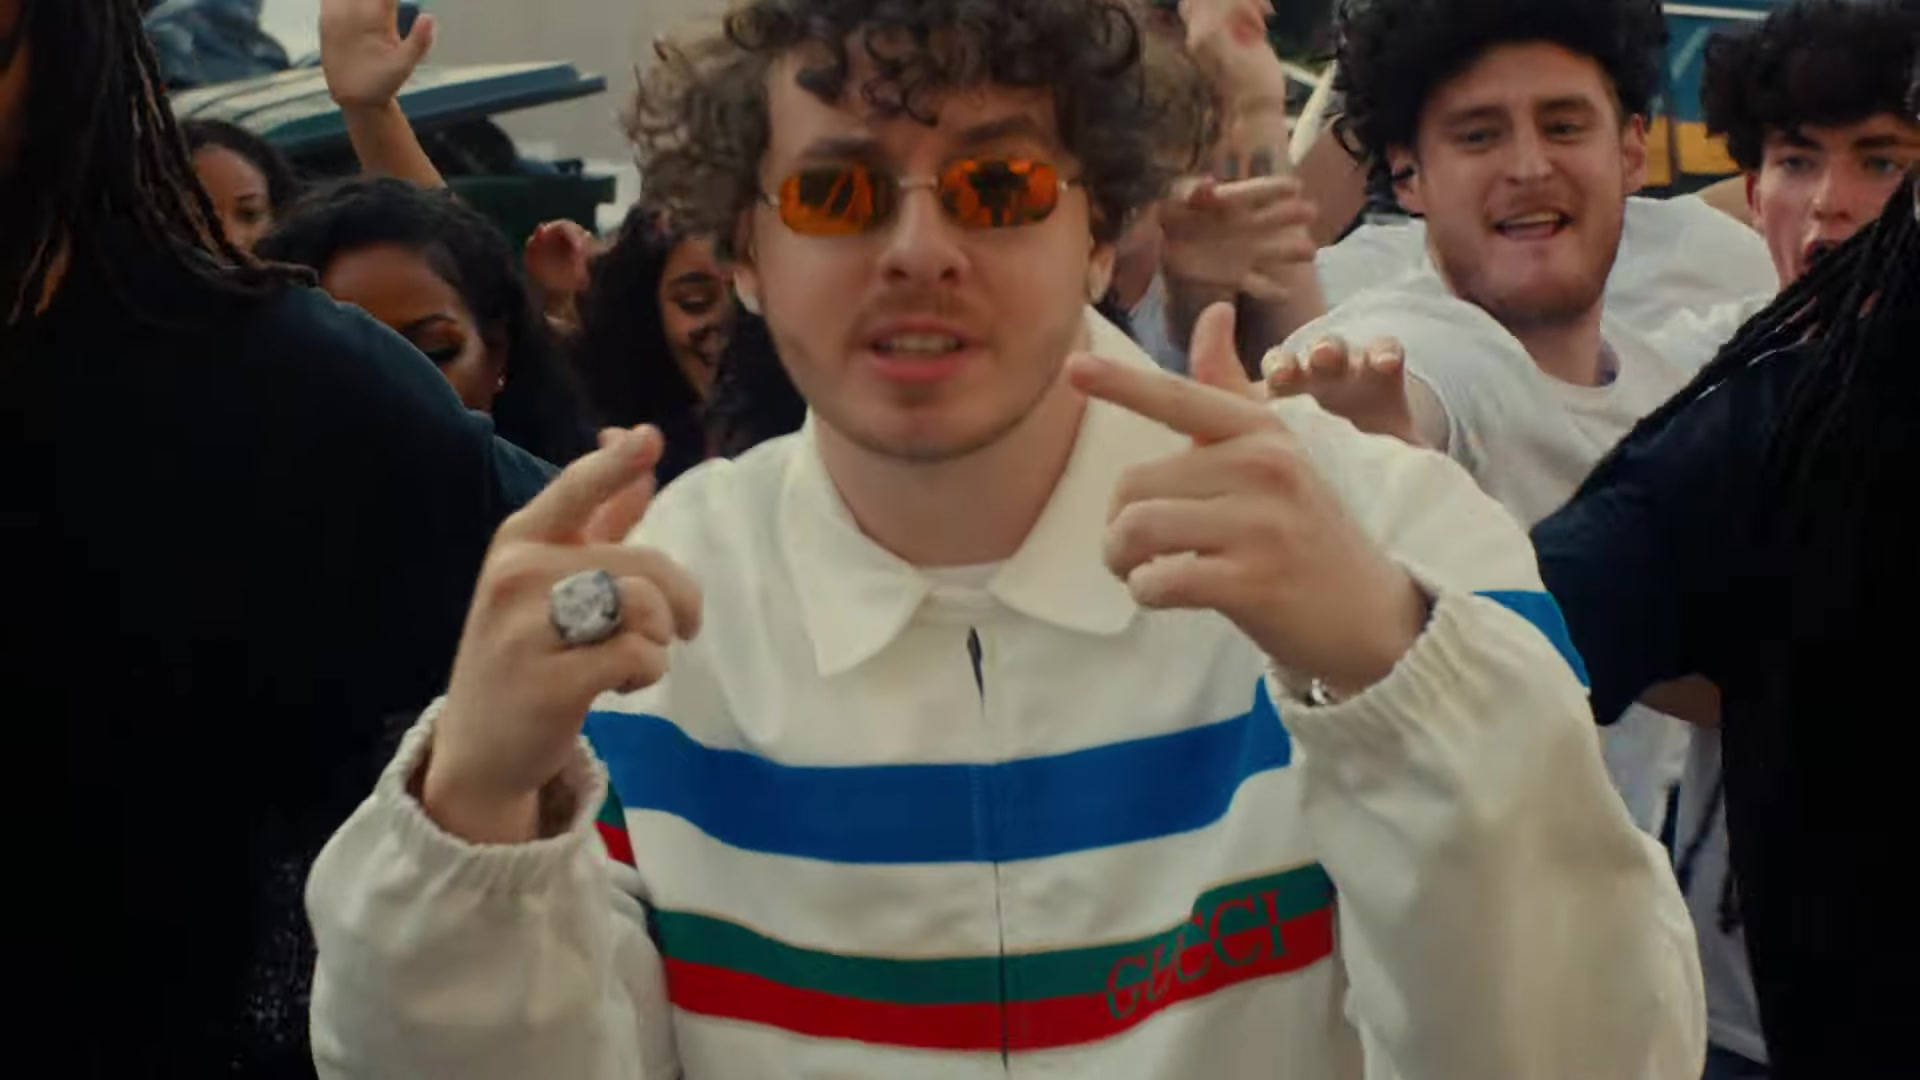 1920X1080 Jack Harlow Wallpaper and Background